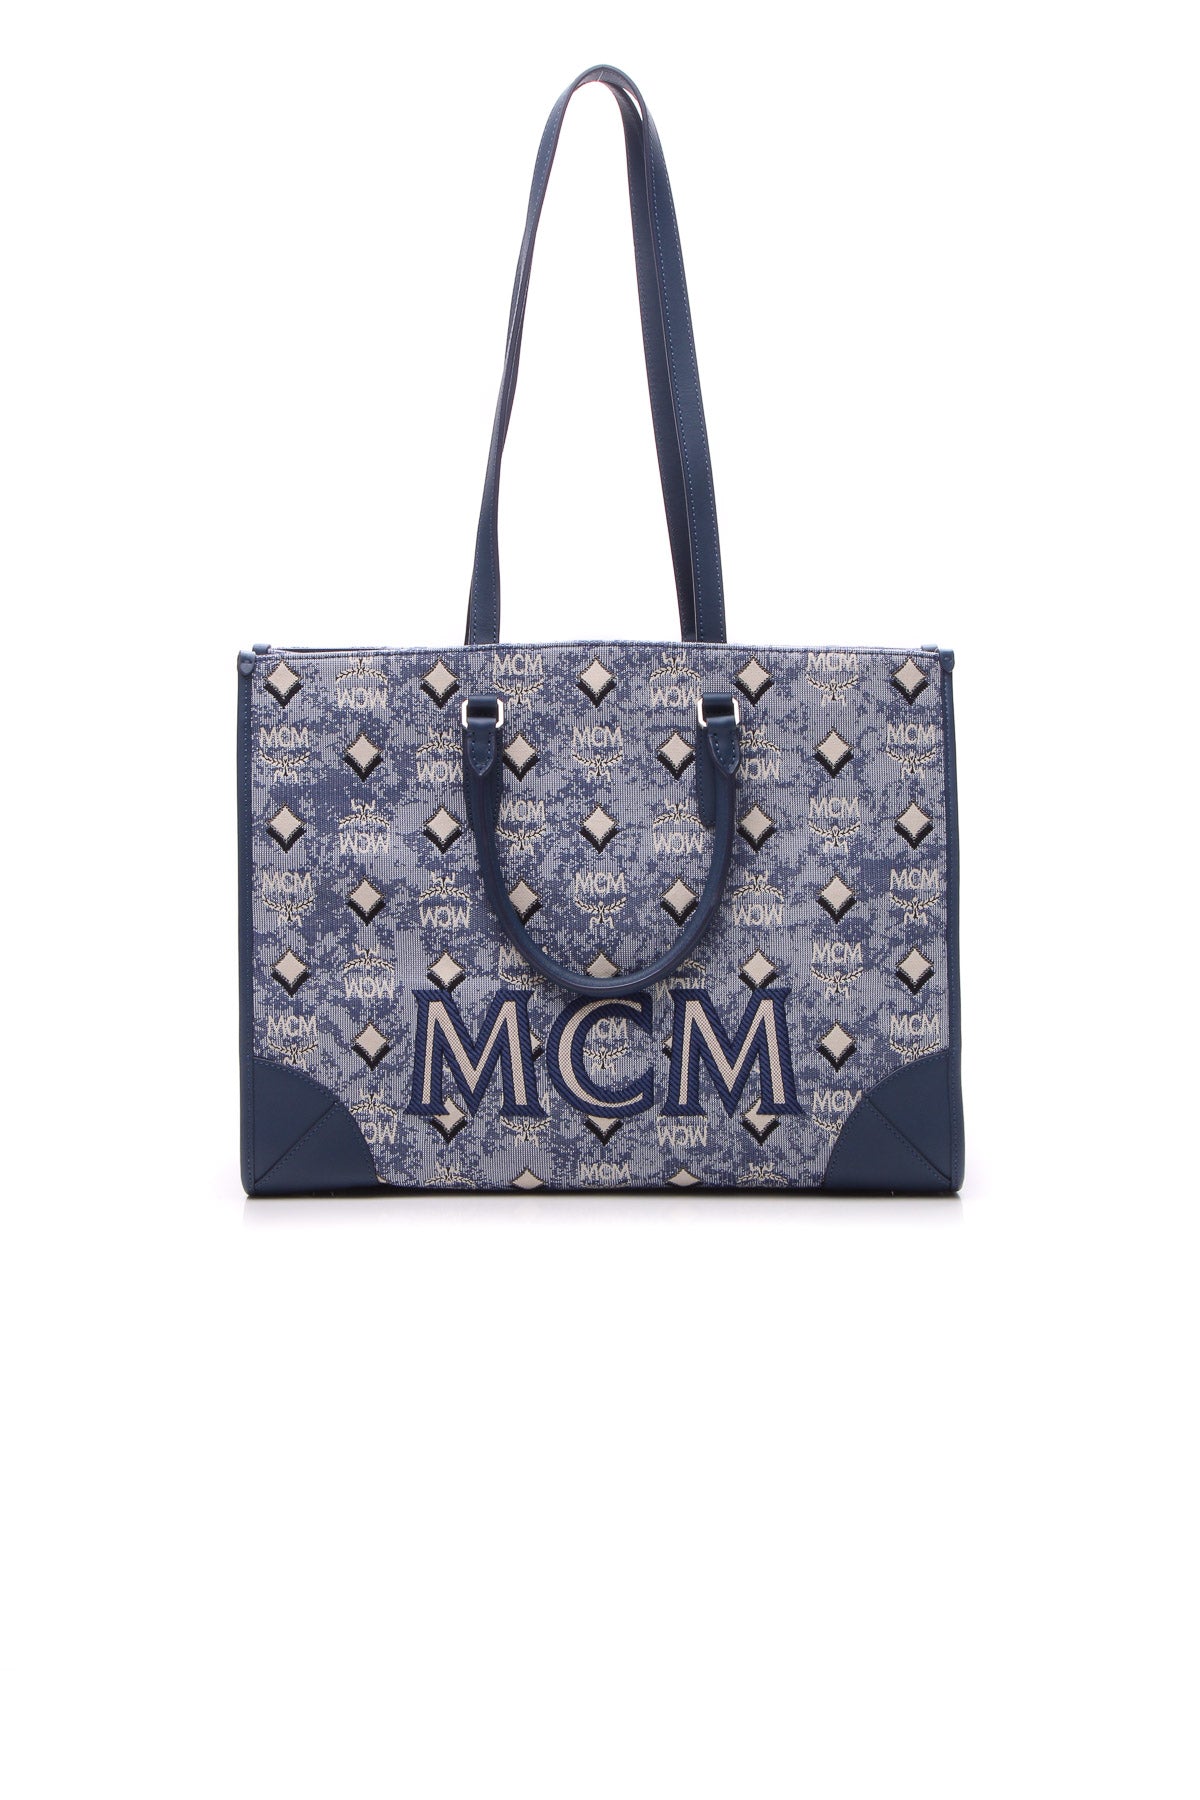 MCM Tote Bag Real vs Fake Guide 2023: How to Tell if a MCM Tote